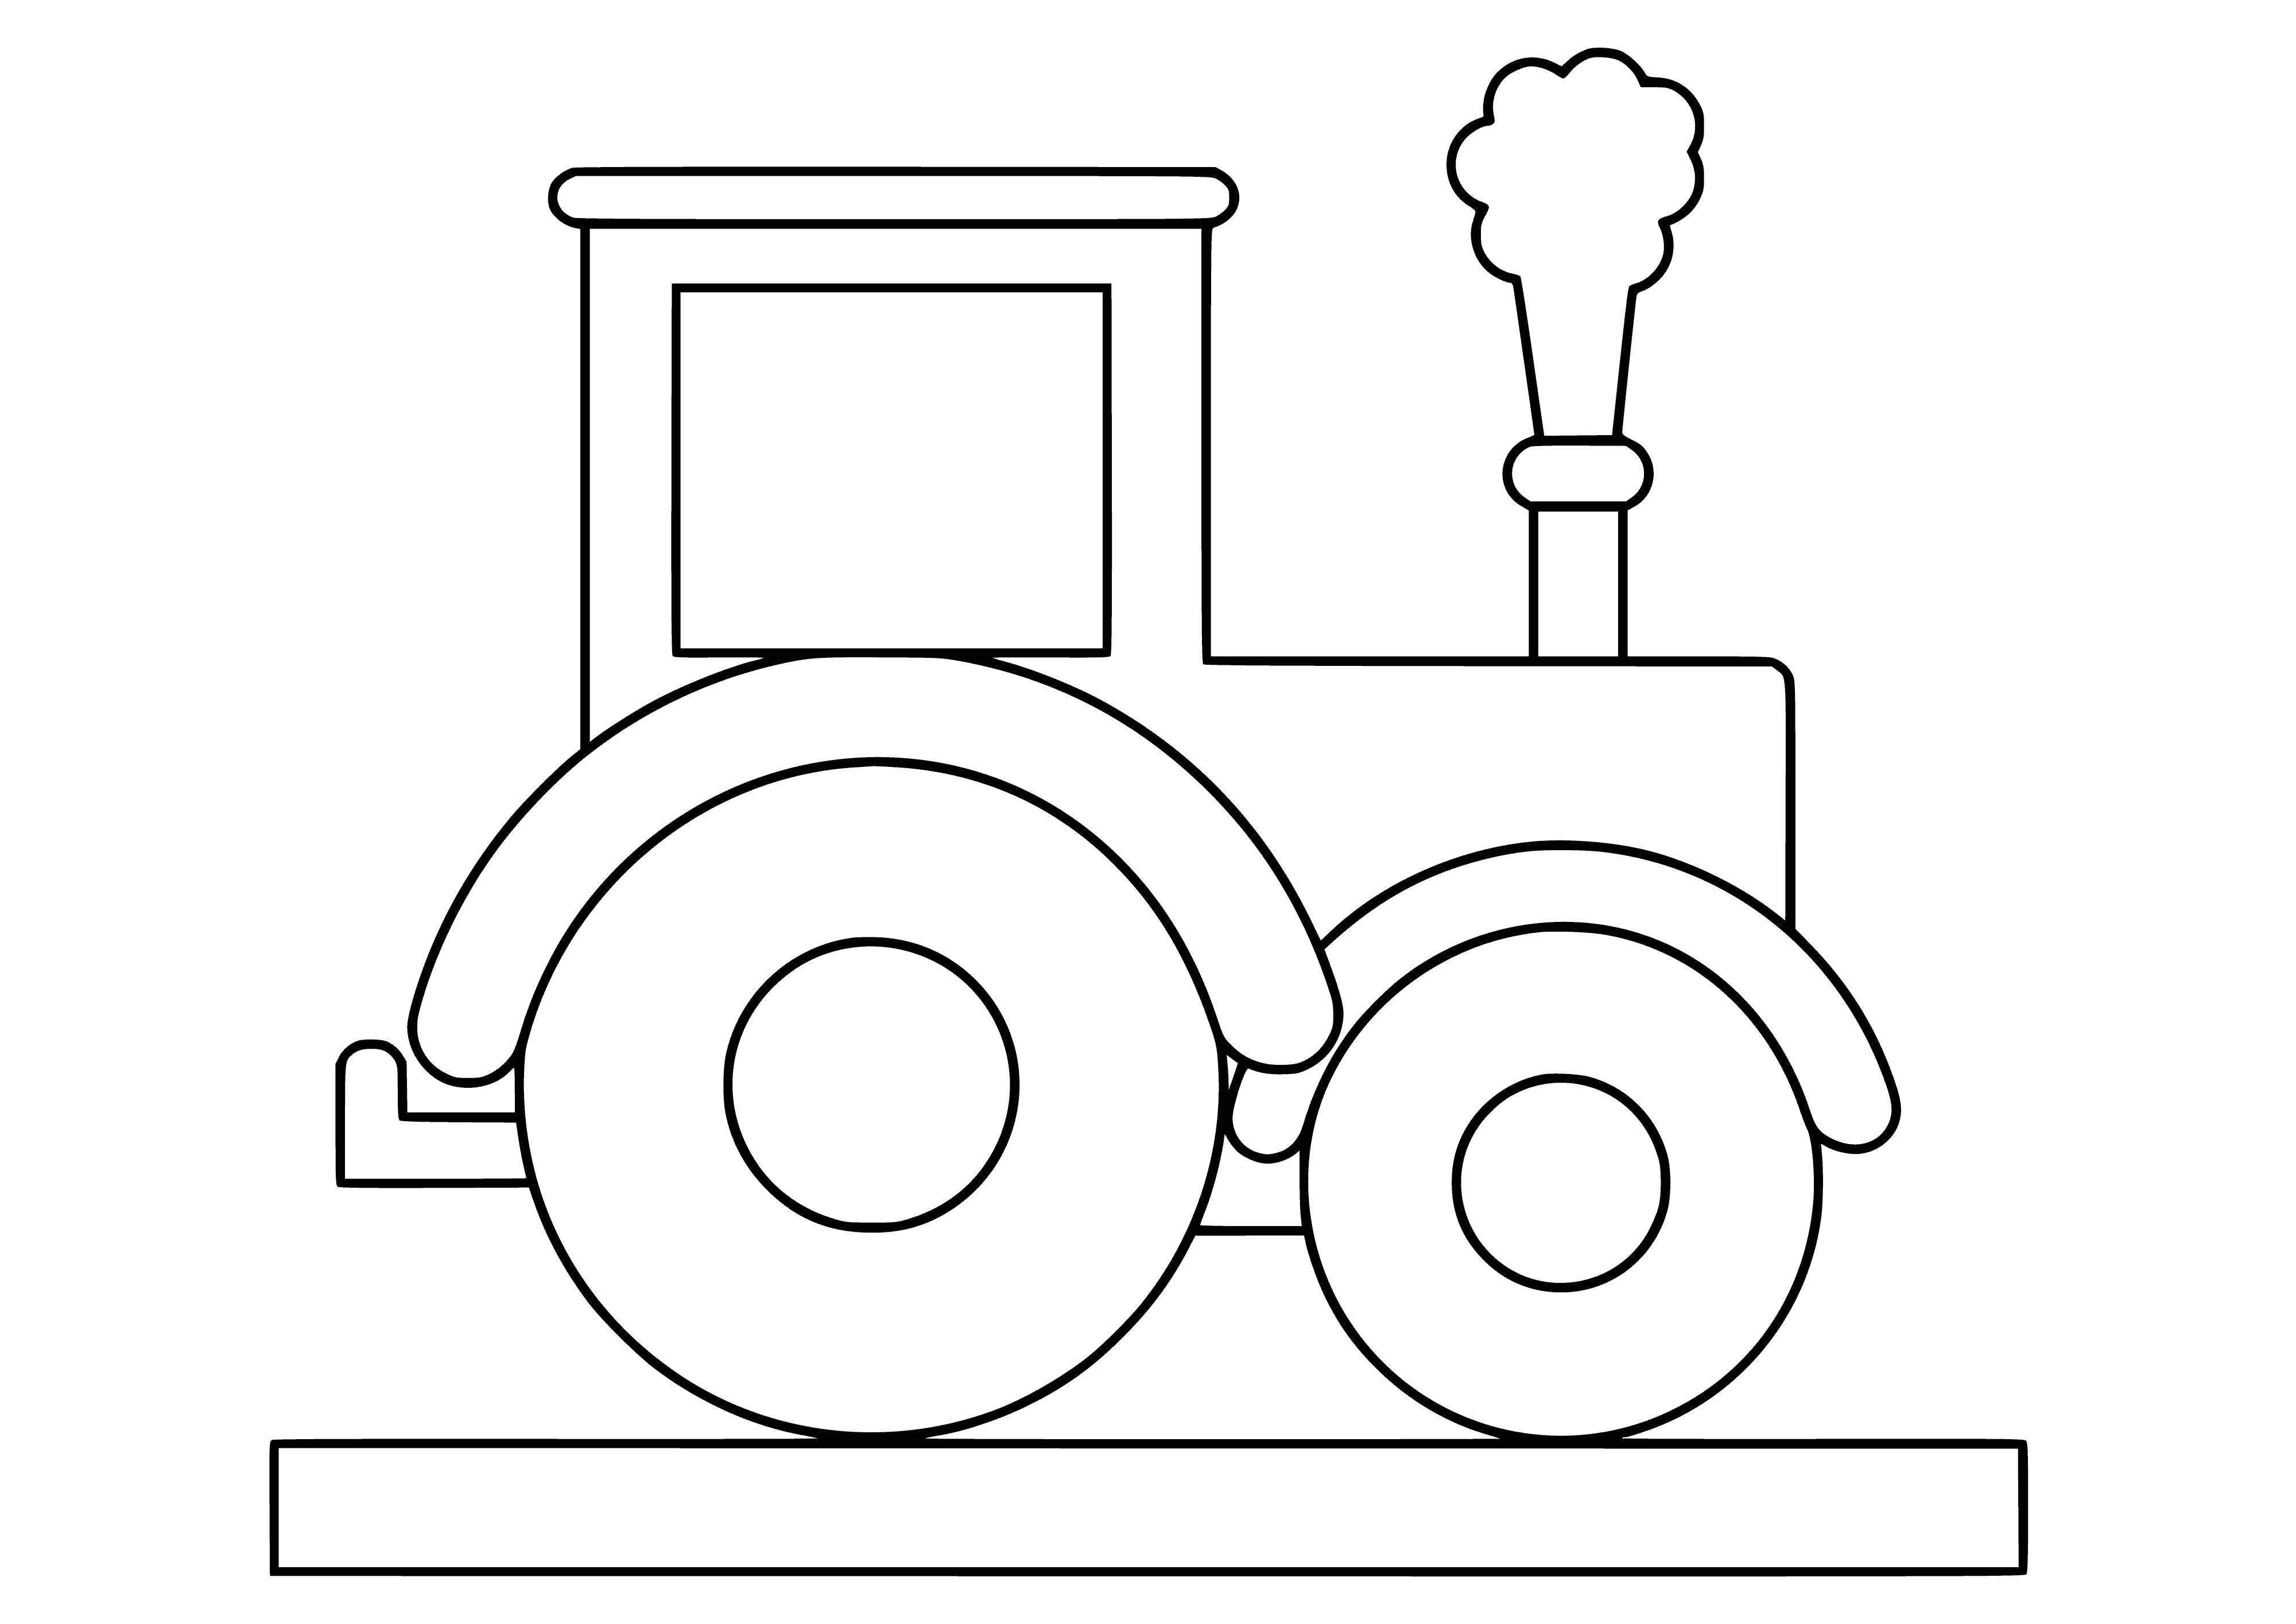 coloring page: Tractor plowing field on a sunny day; the tractor is green and yellow with white clouds.